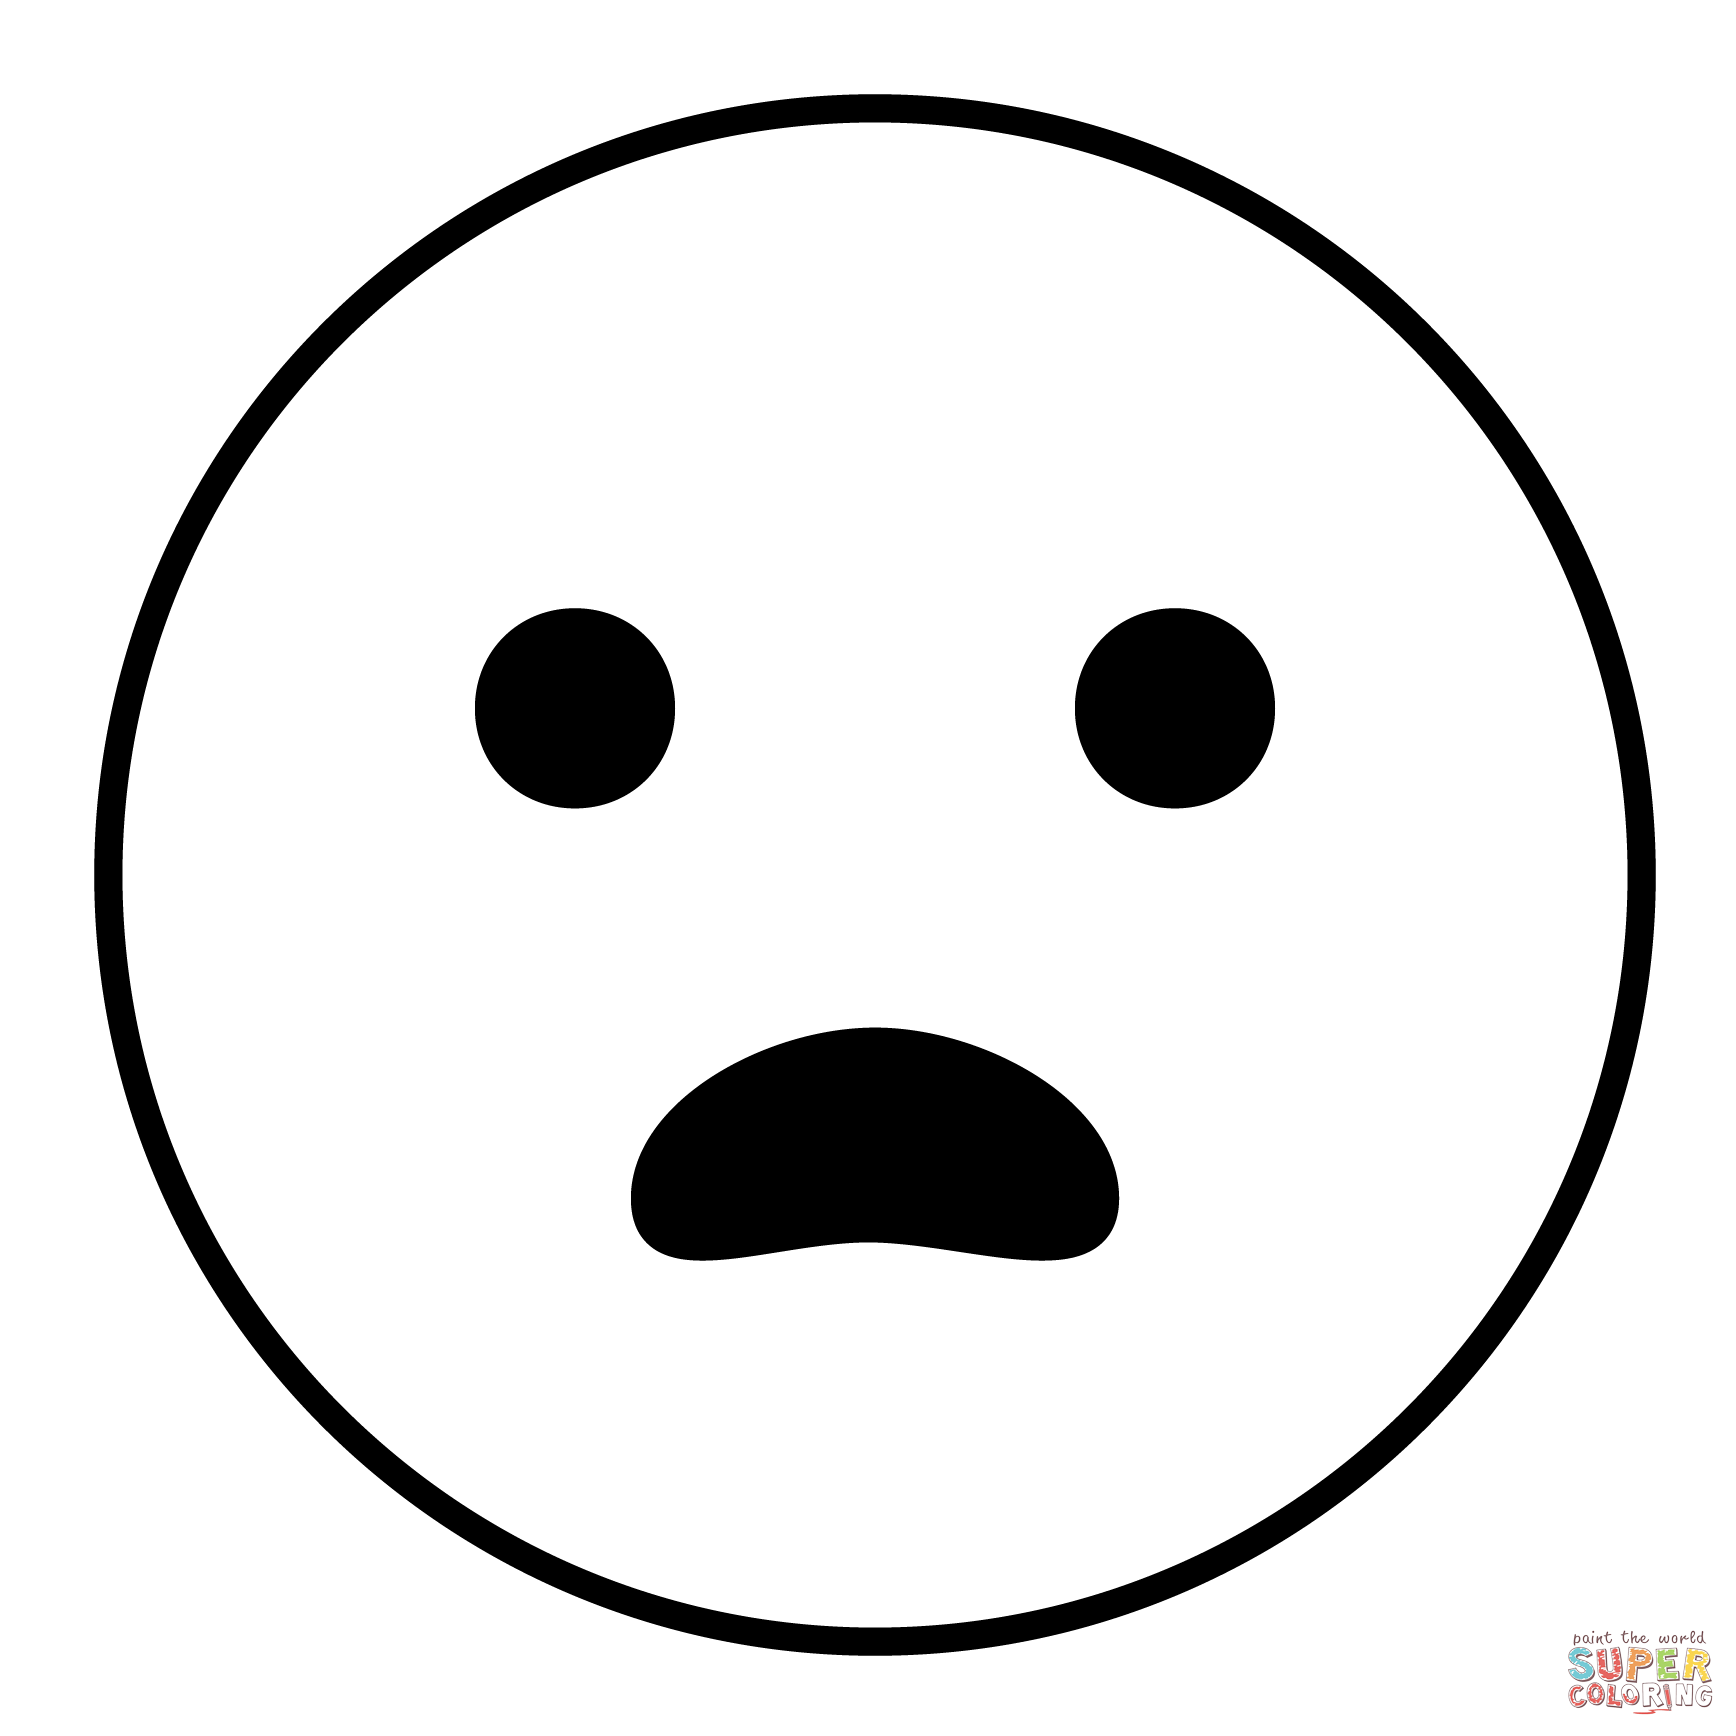 Frowning face with open mouth emoji coloring page free printable coloring pages